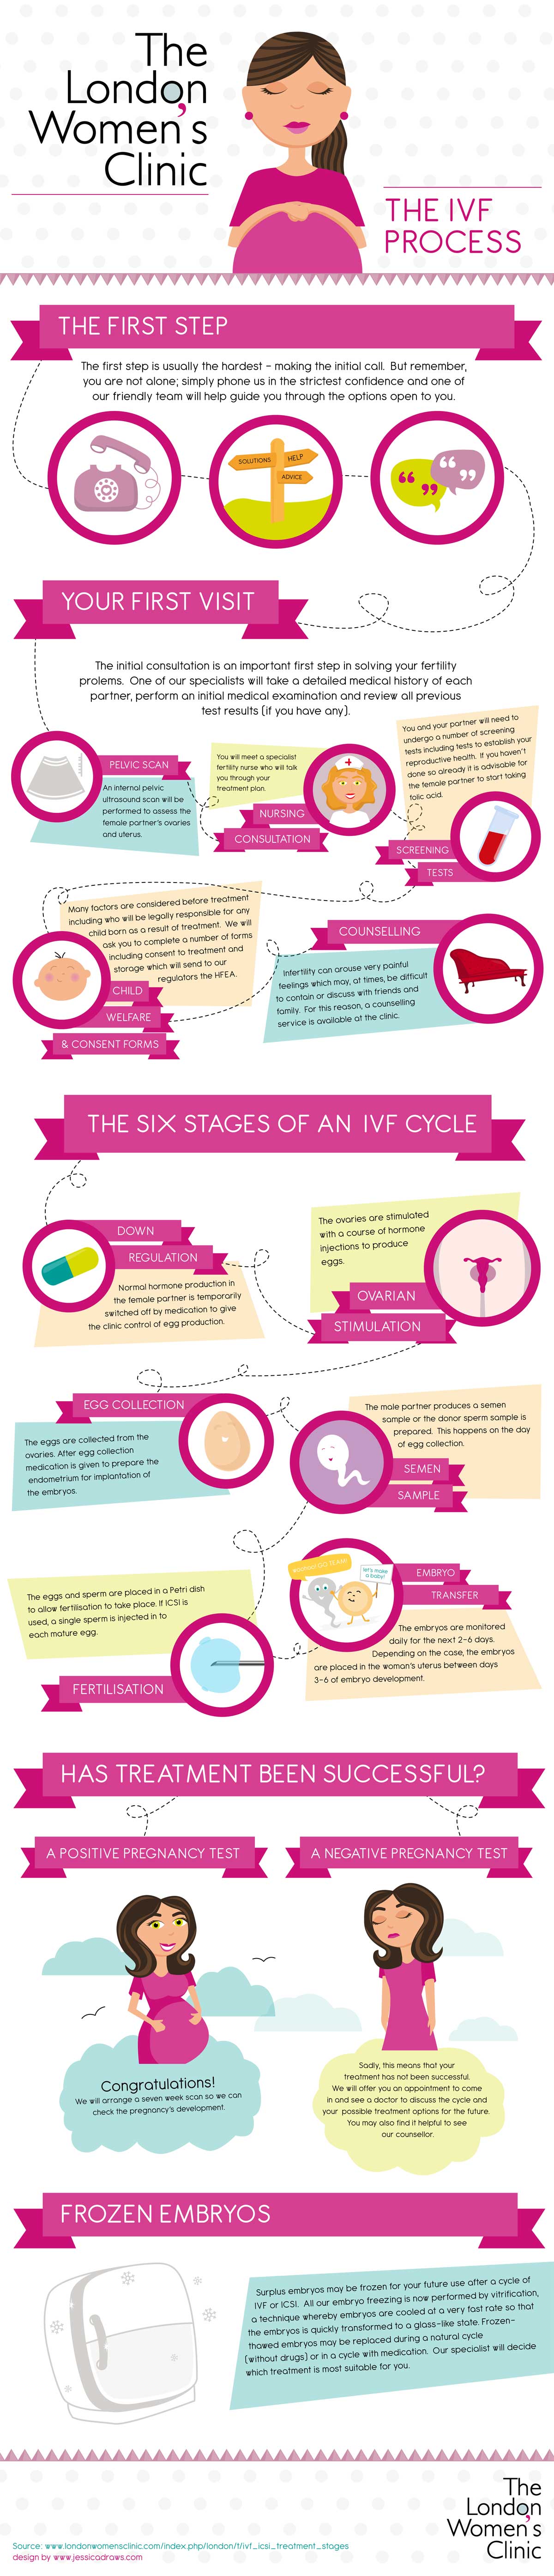 6 Important Stages of an IVF Cycle